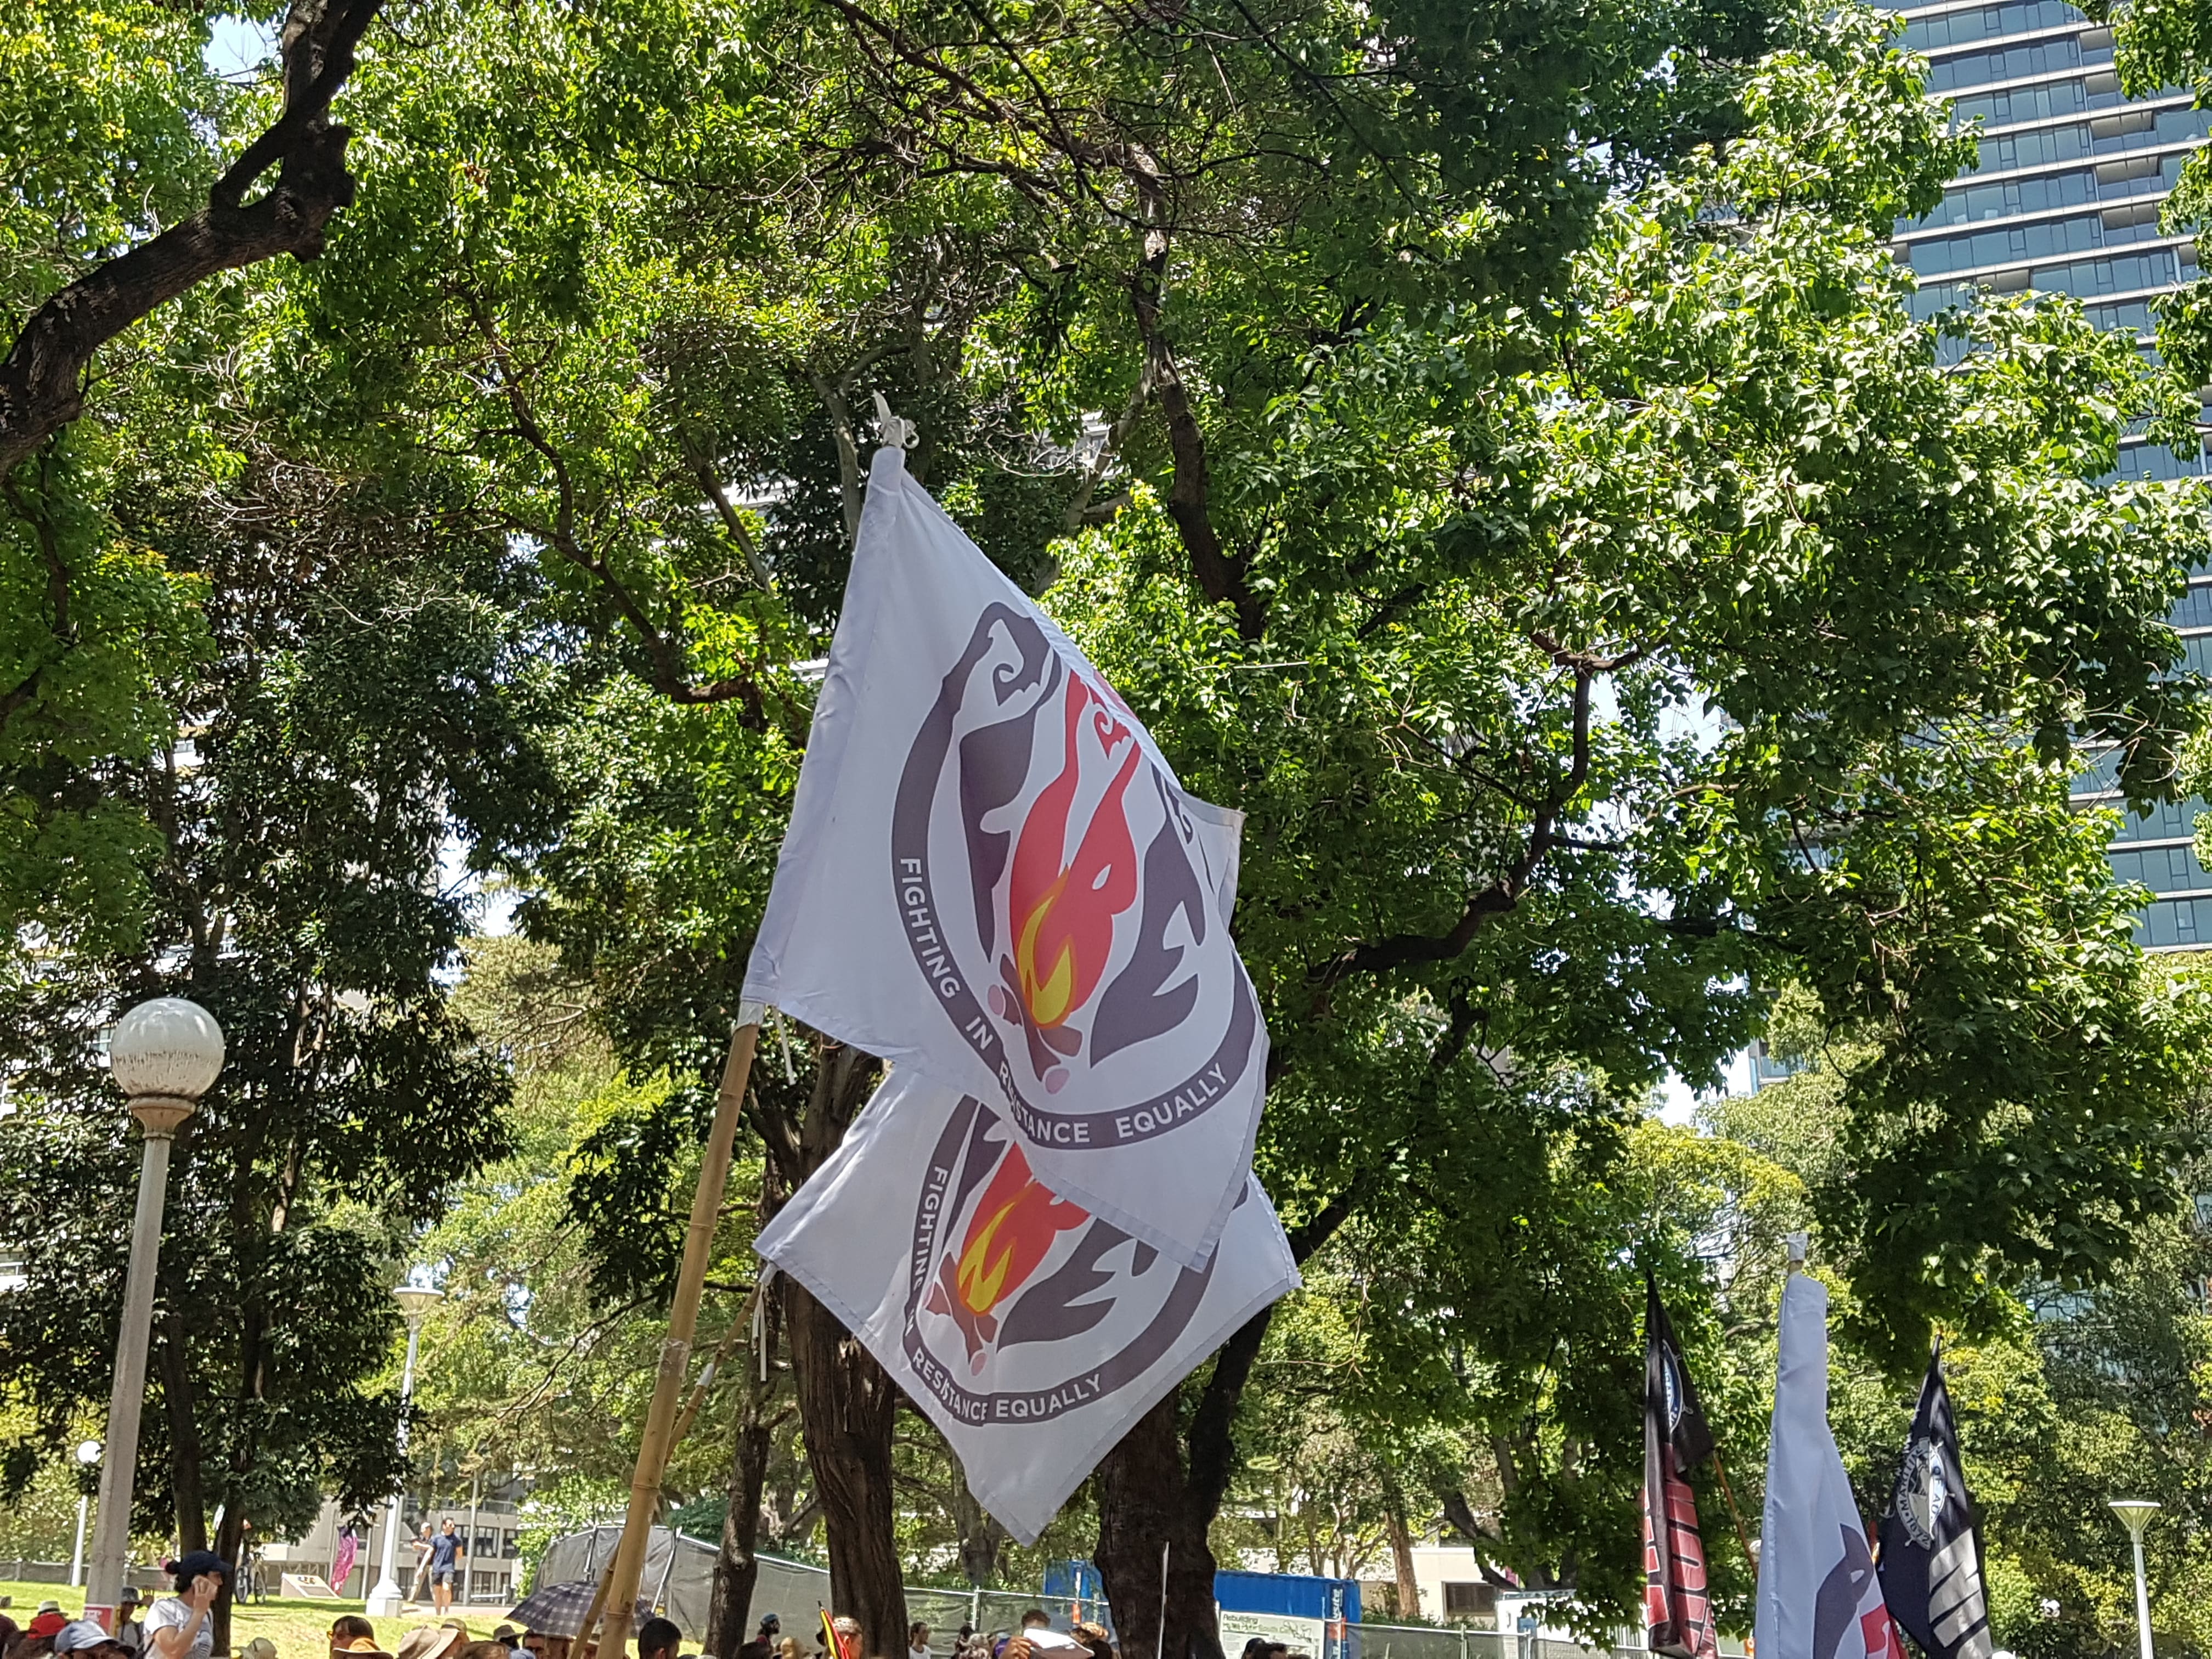 Flags from FIRE (Fighting In Resistance Equally) fly high over the rally. 